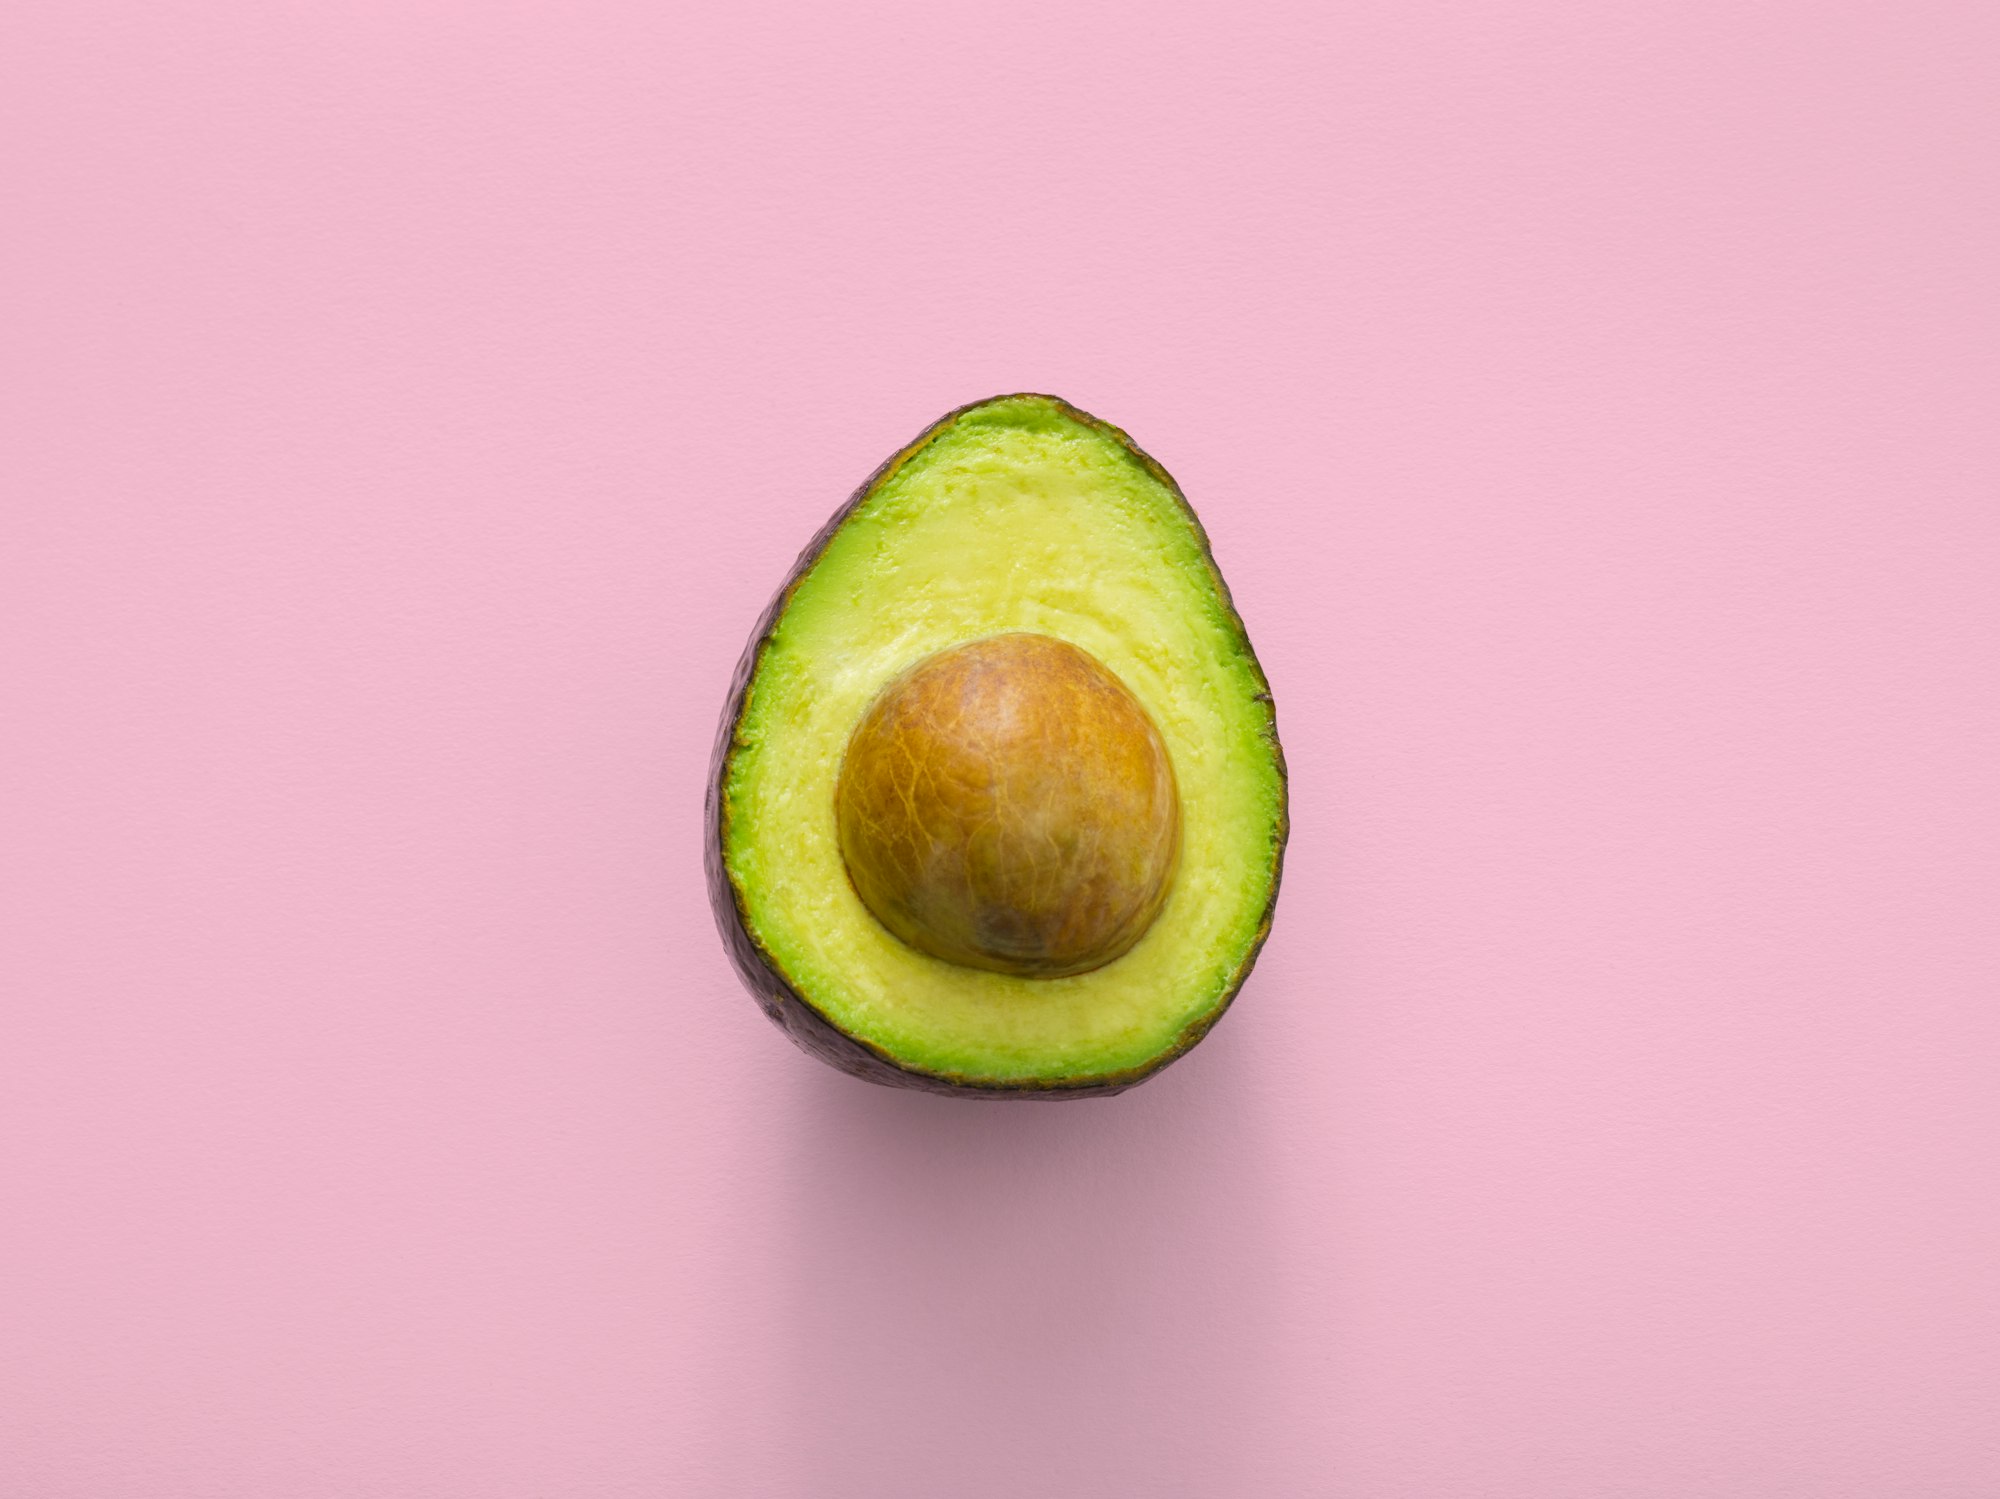 Avocado is a green rainbow food by www.thoughtcatalog.com for Unsplash